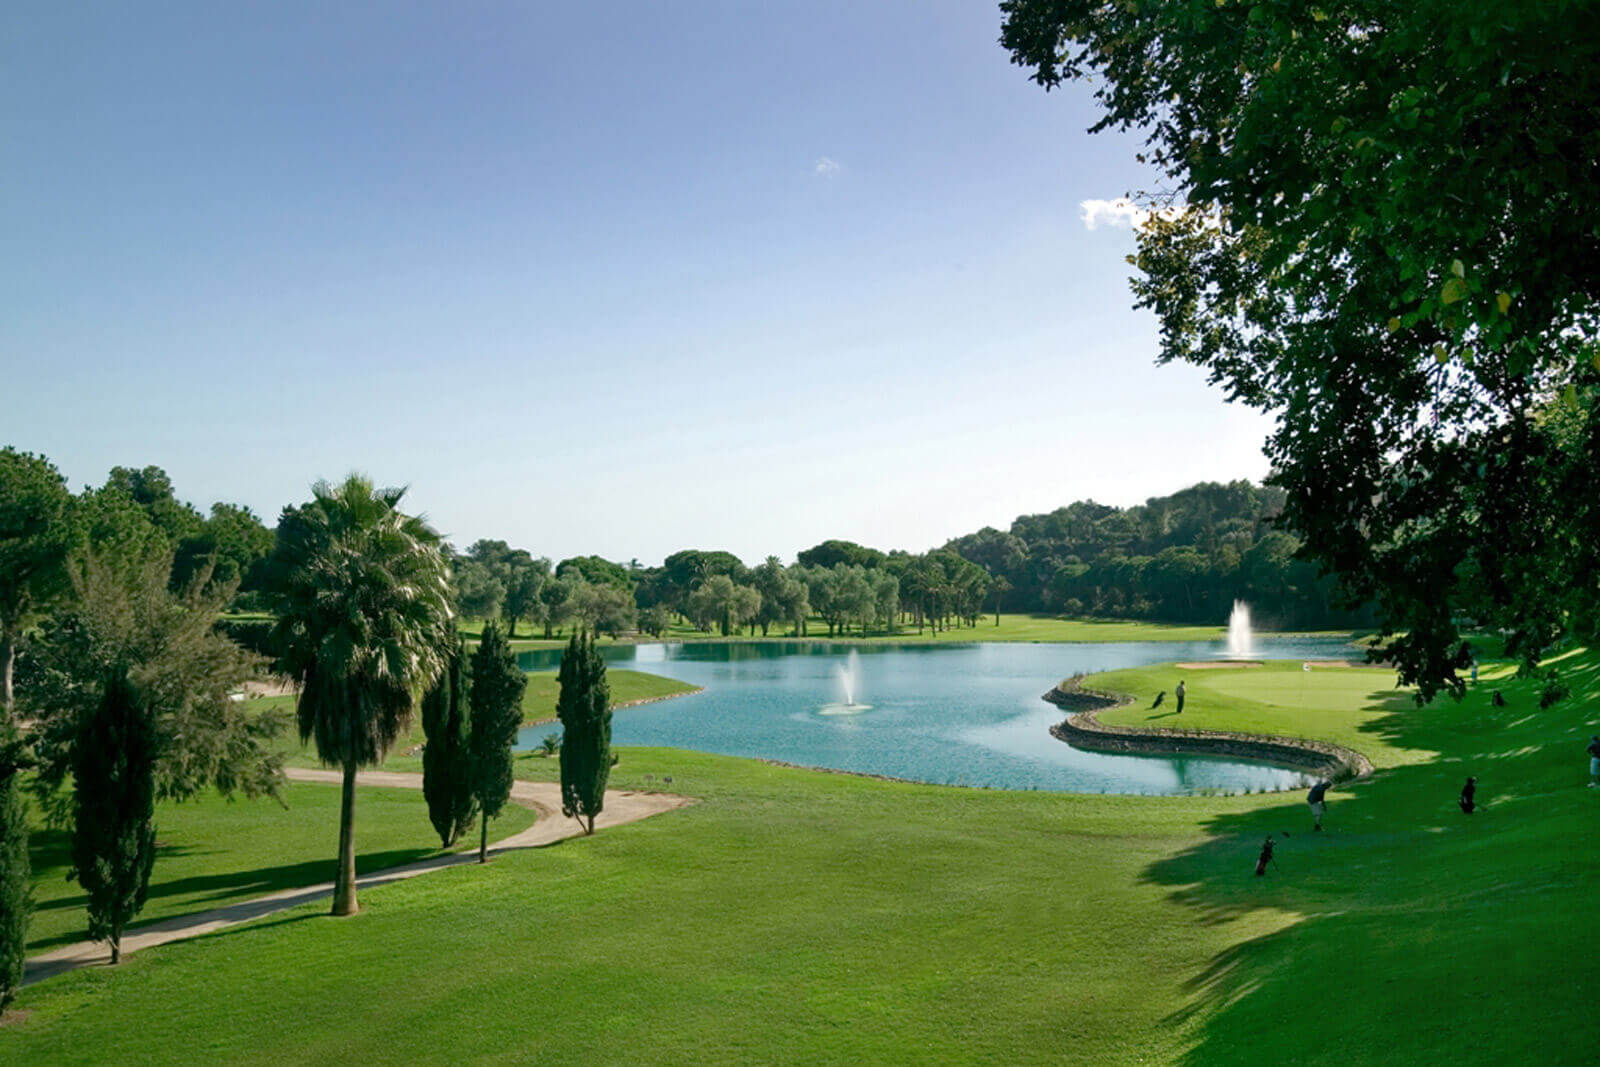 Golf course at Rio Real Golf Hotel with two fountains in the centre of the lake and four golfers playing towards the green